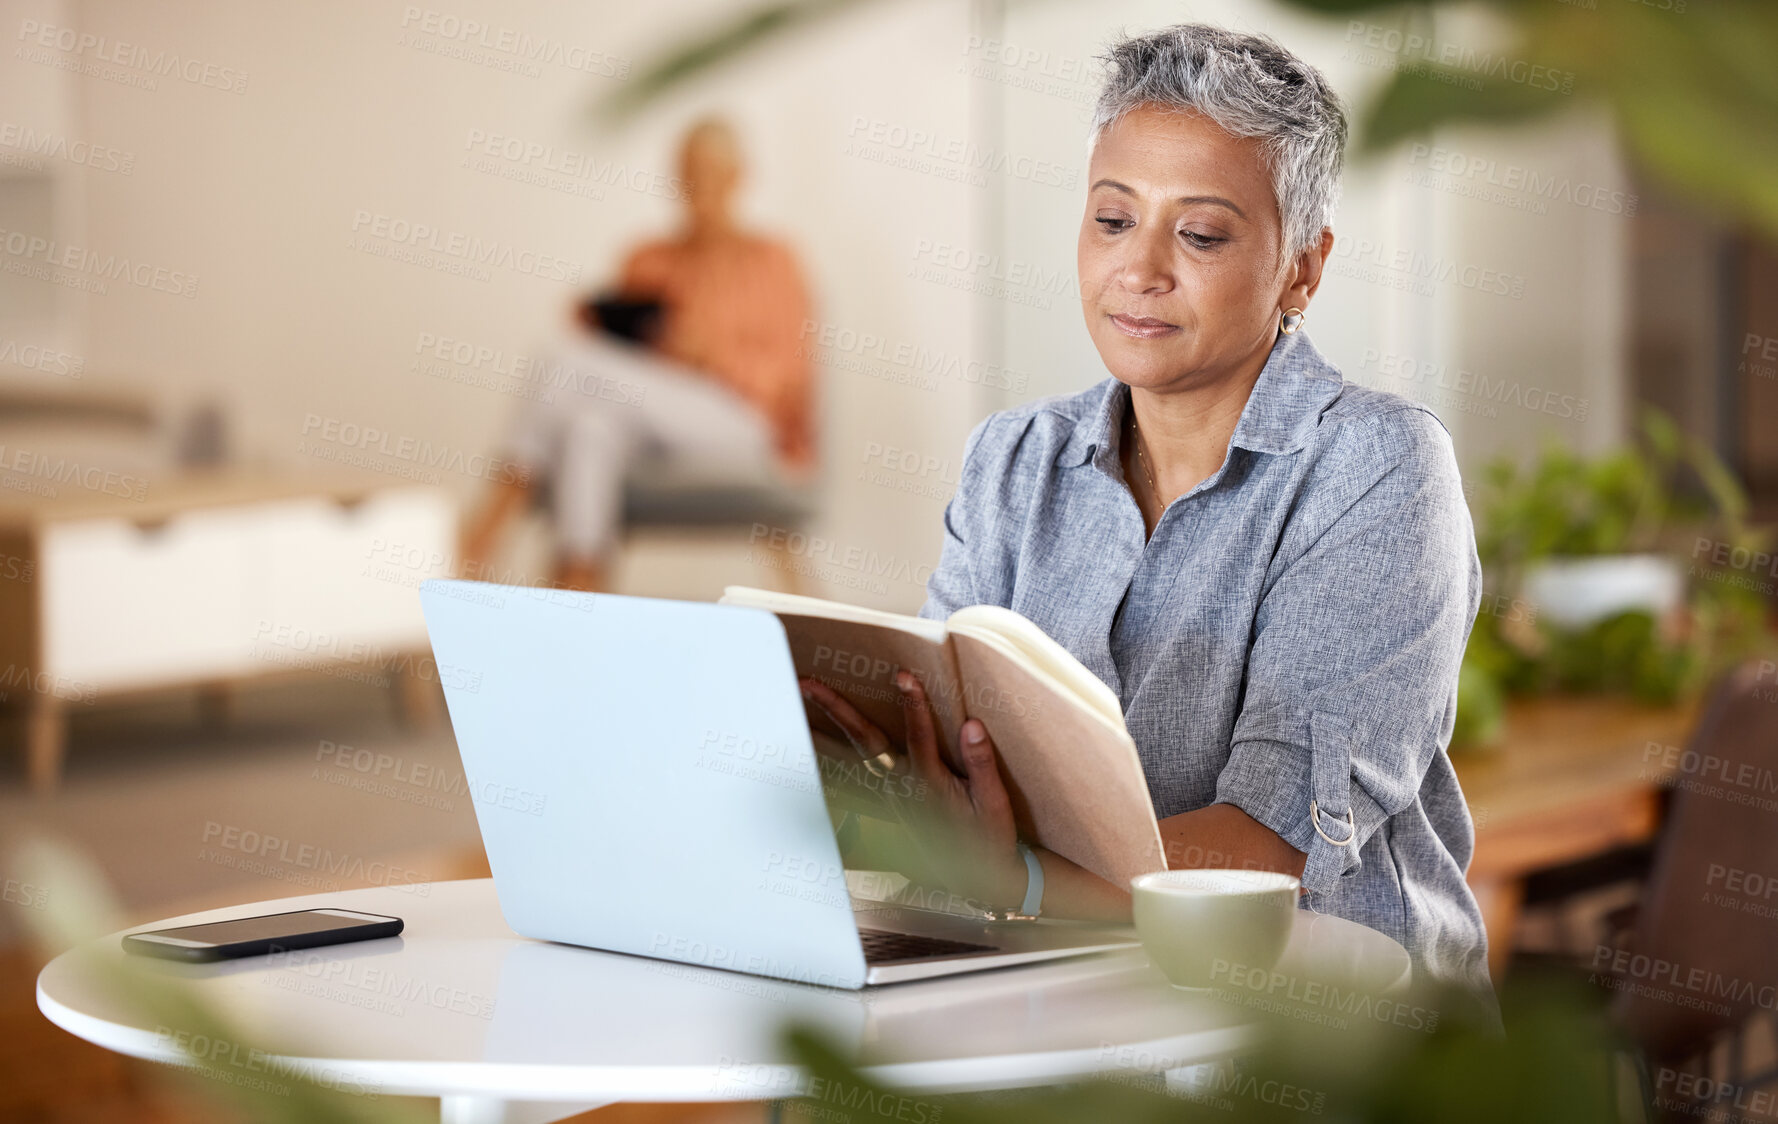 Buy stock photo Laptop, book and senior woman reading while doing research for a project in the modern office. Technology, coffee and mature female marketing professional enjoying a novel story in her workplace.